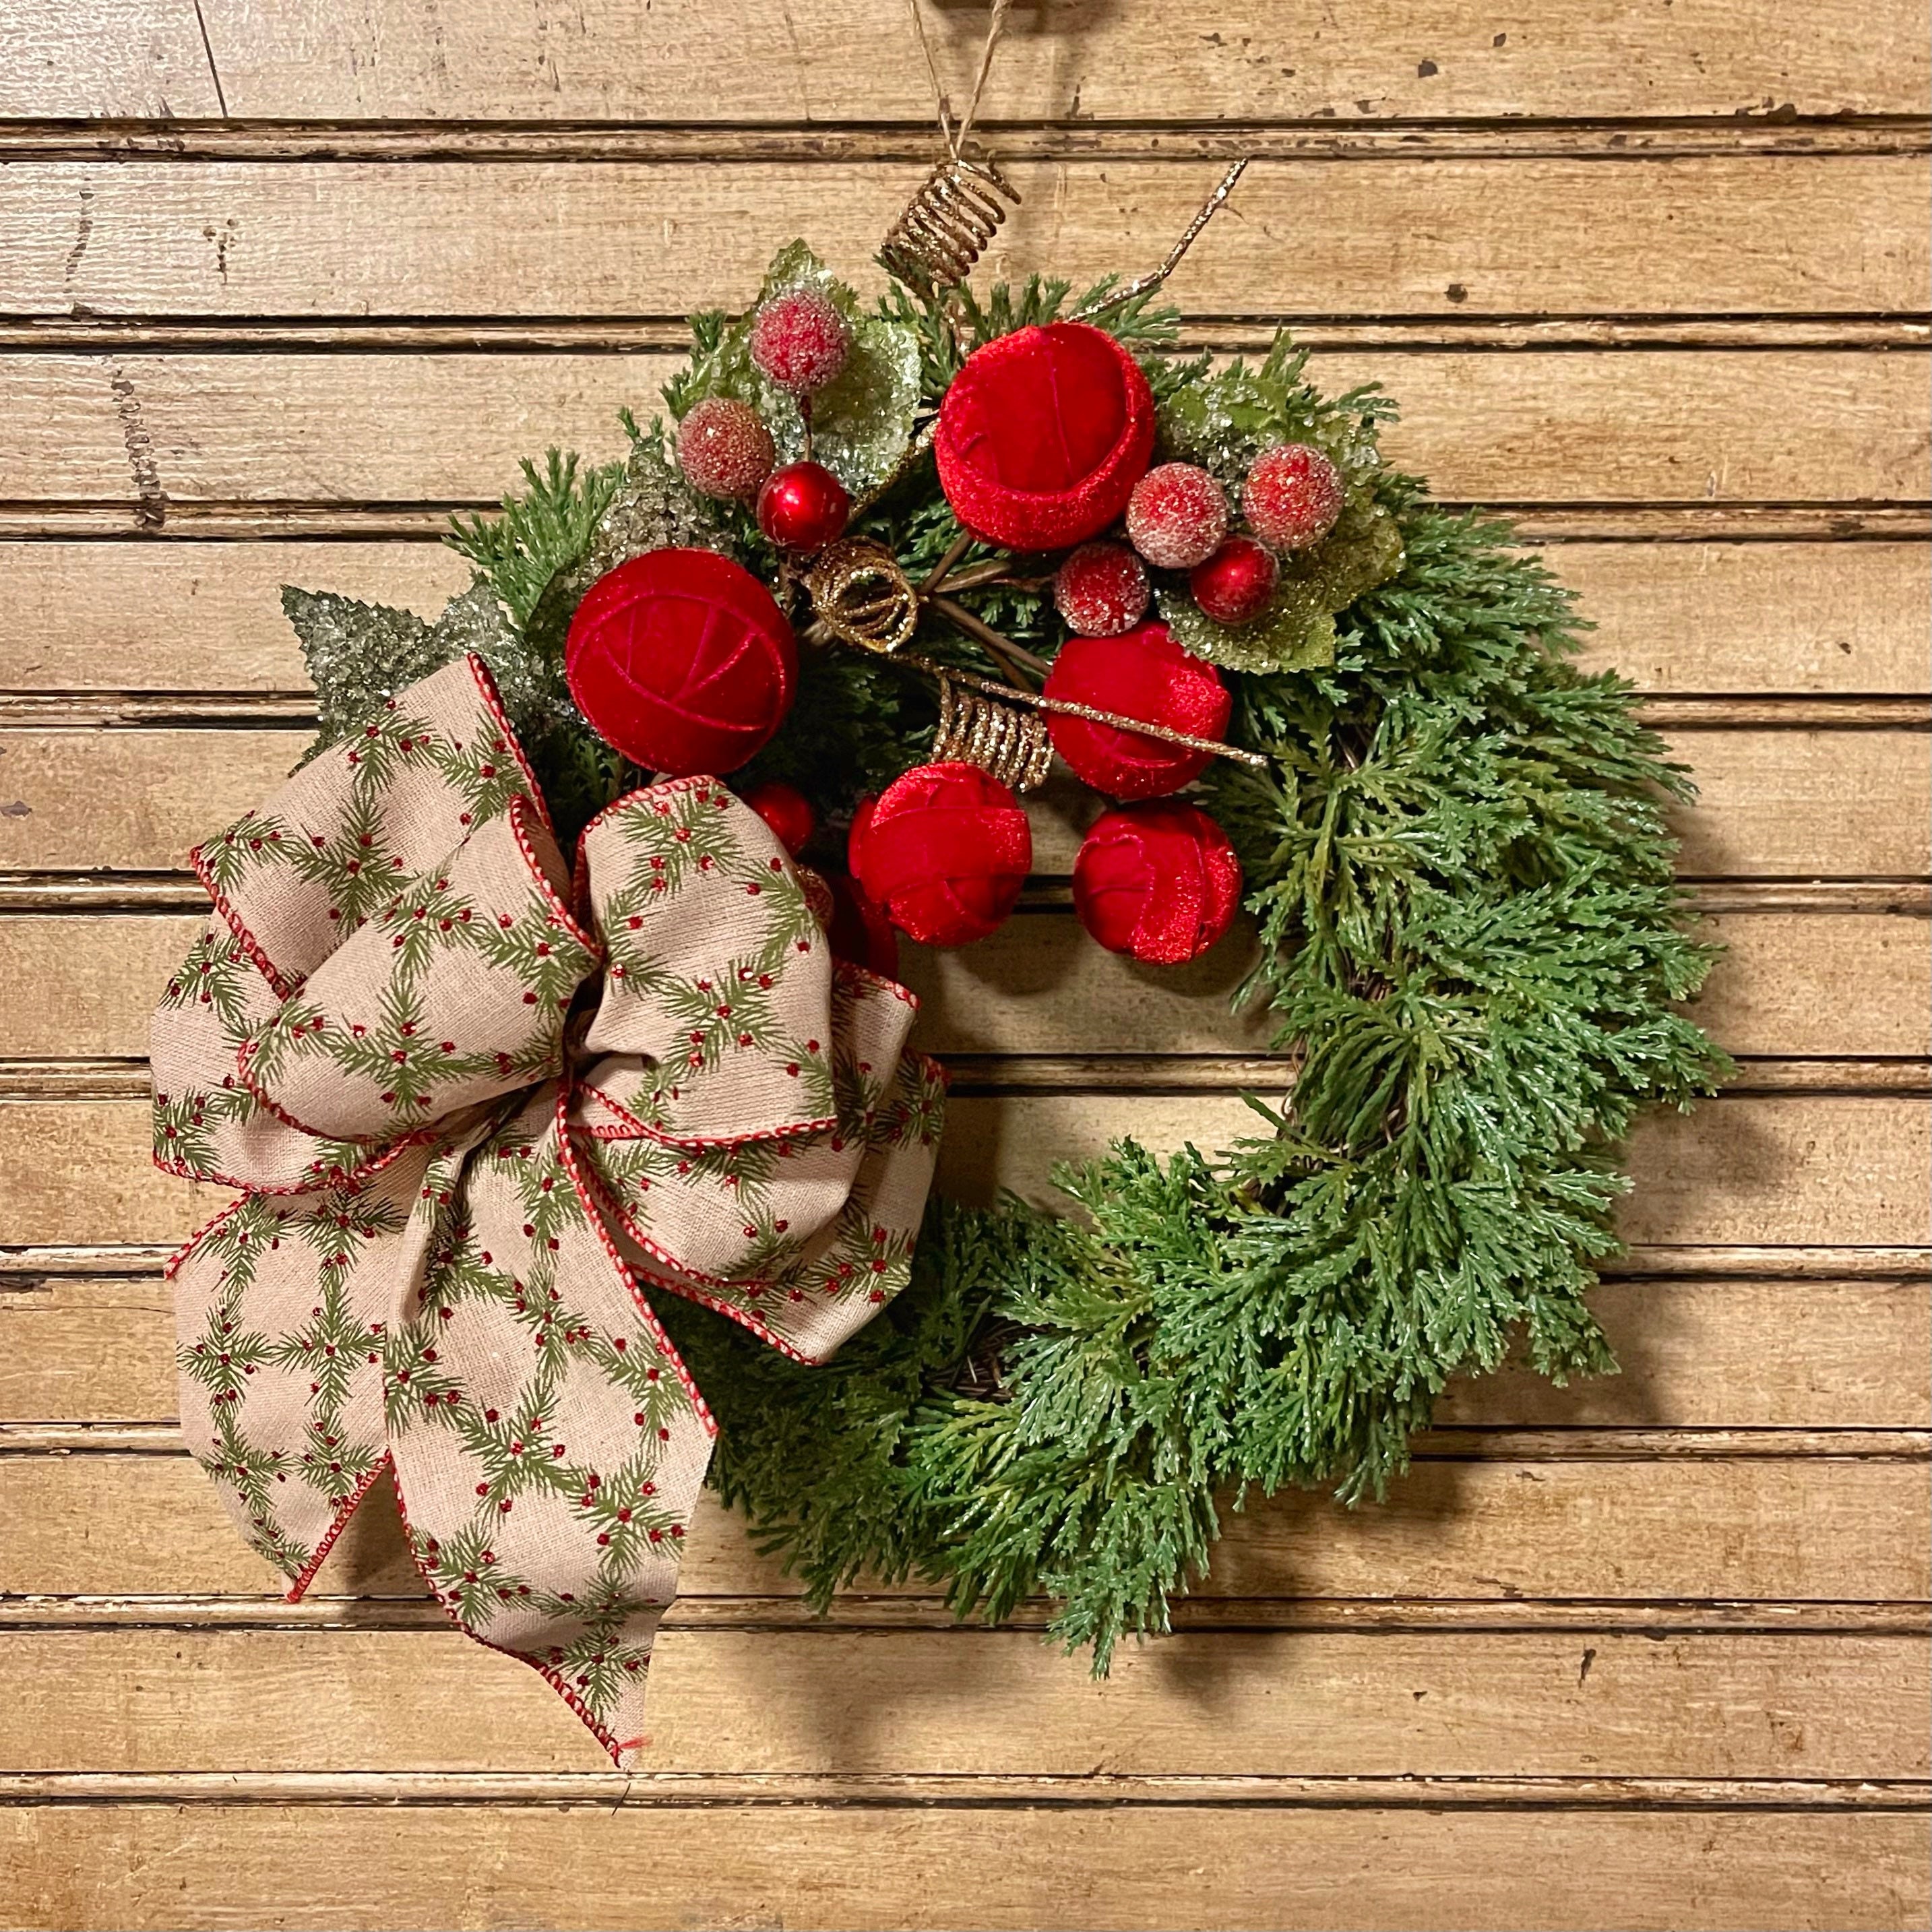 Lariat Christmas Wreath With Frosted Red Balls, Christmas Tree